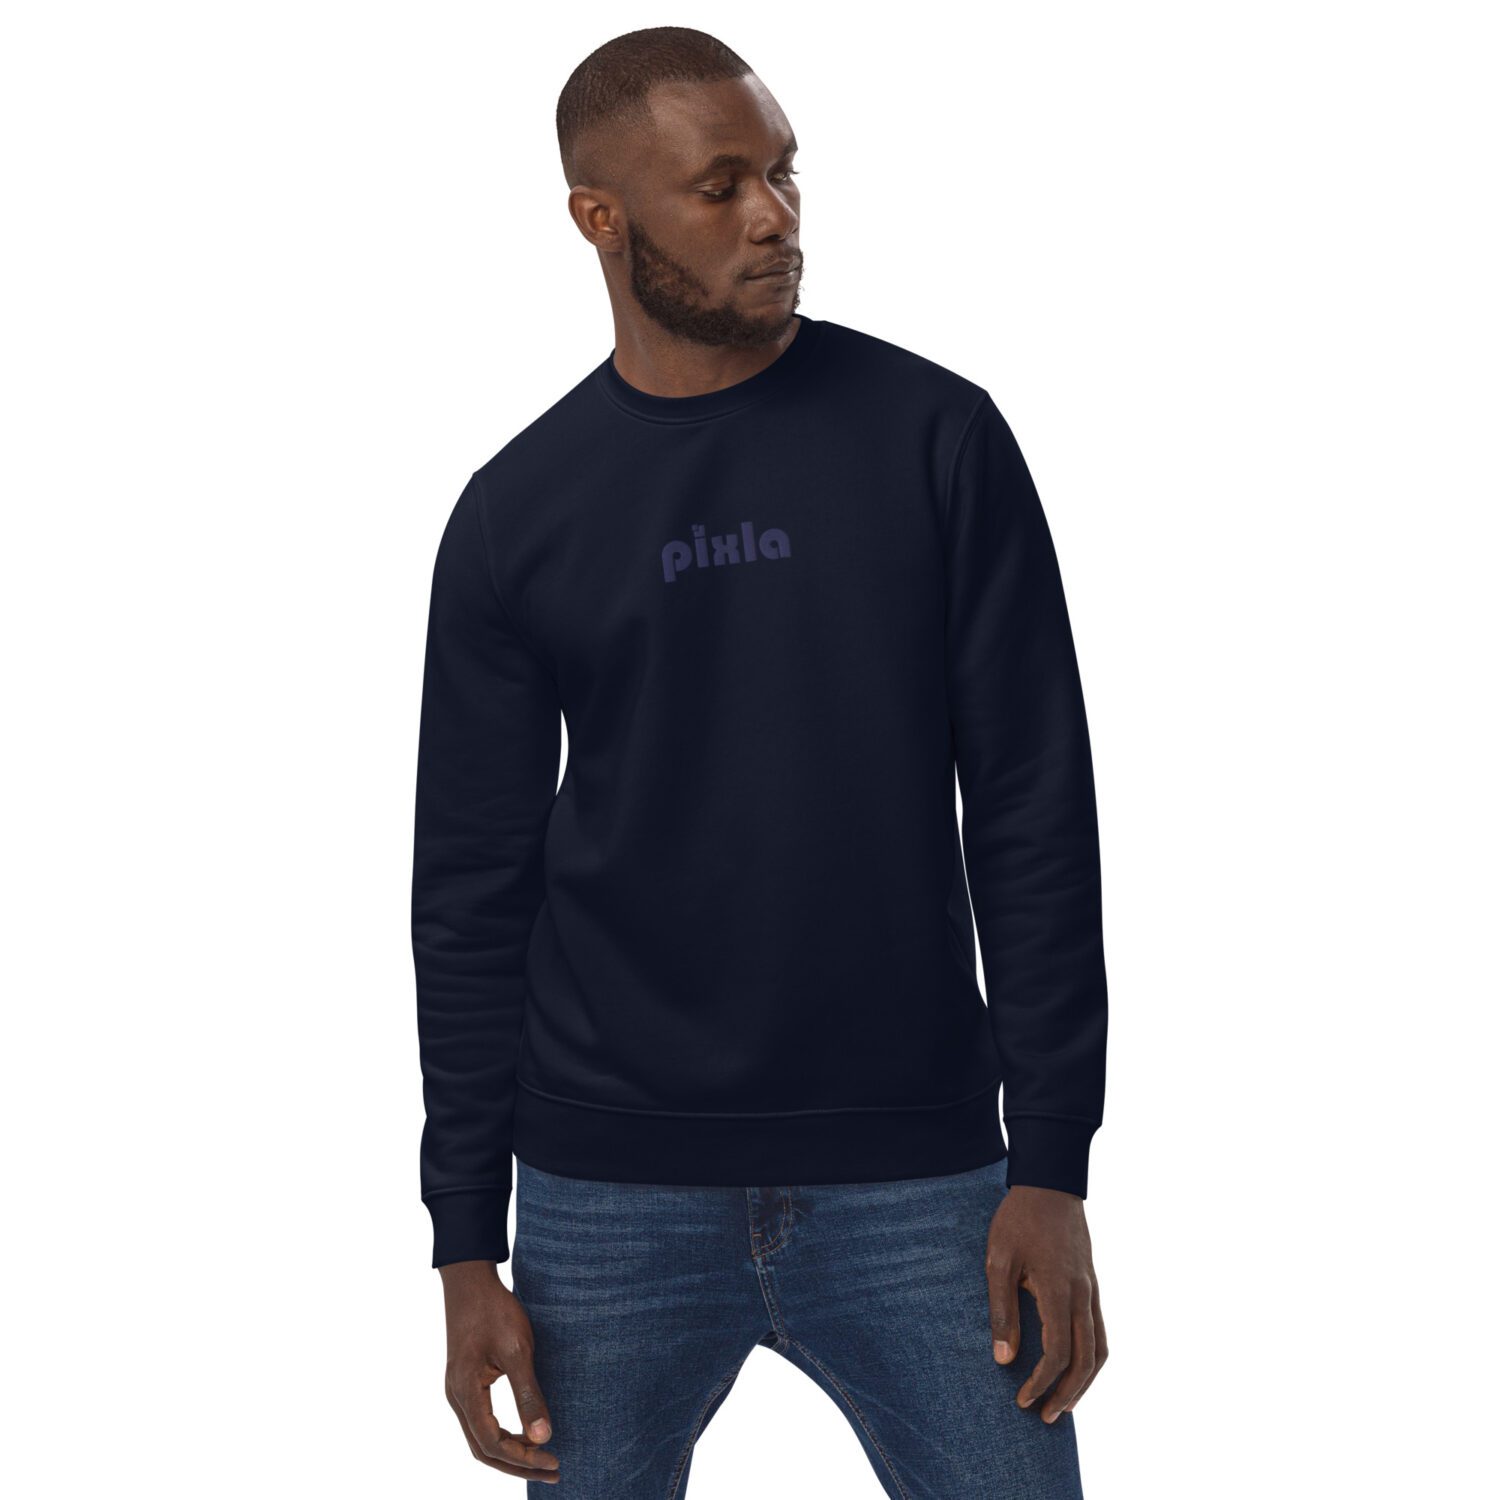 A classic slim-fit navy-on-navy premium sweatshirt with navy embroidery on the front chest. Made from organic ring-spun combed cotton and recycled polyester in medium-weight with a soft feel. Super soft fleece inside making it perfect for keeping warm.